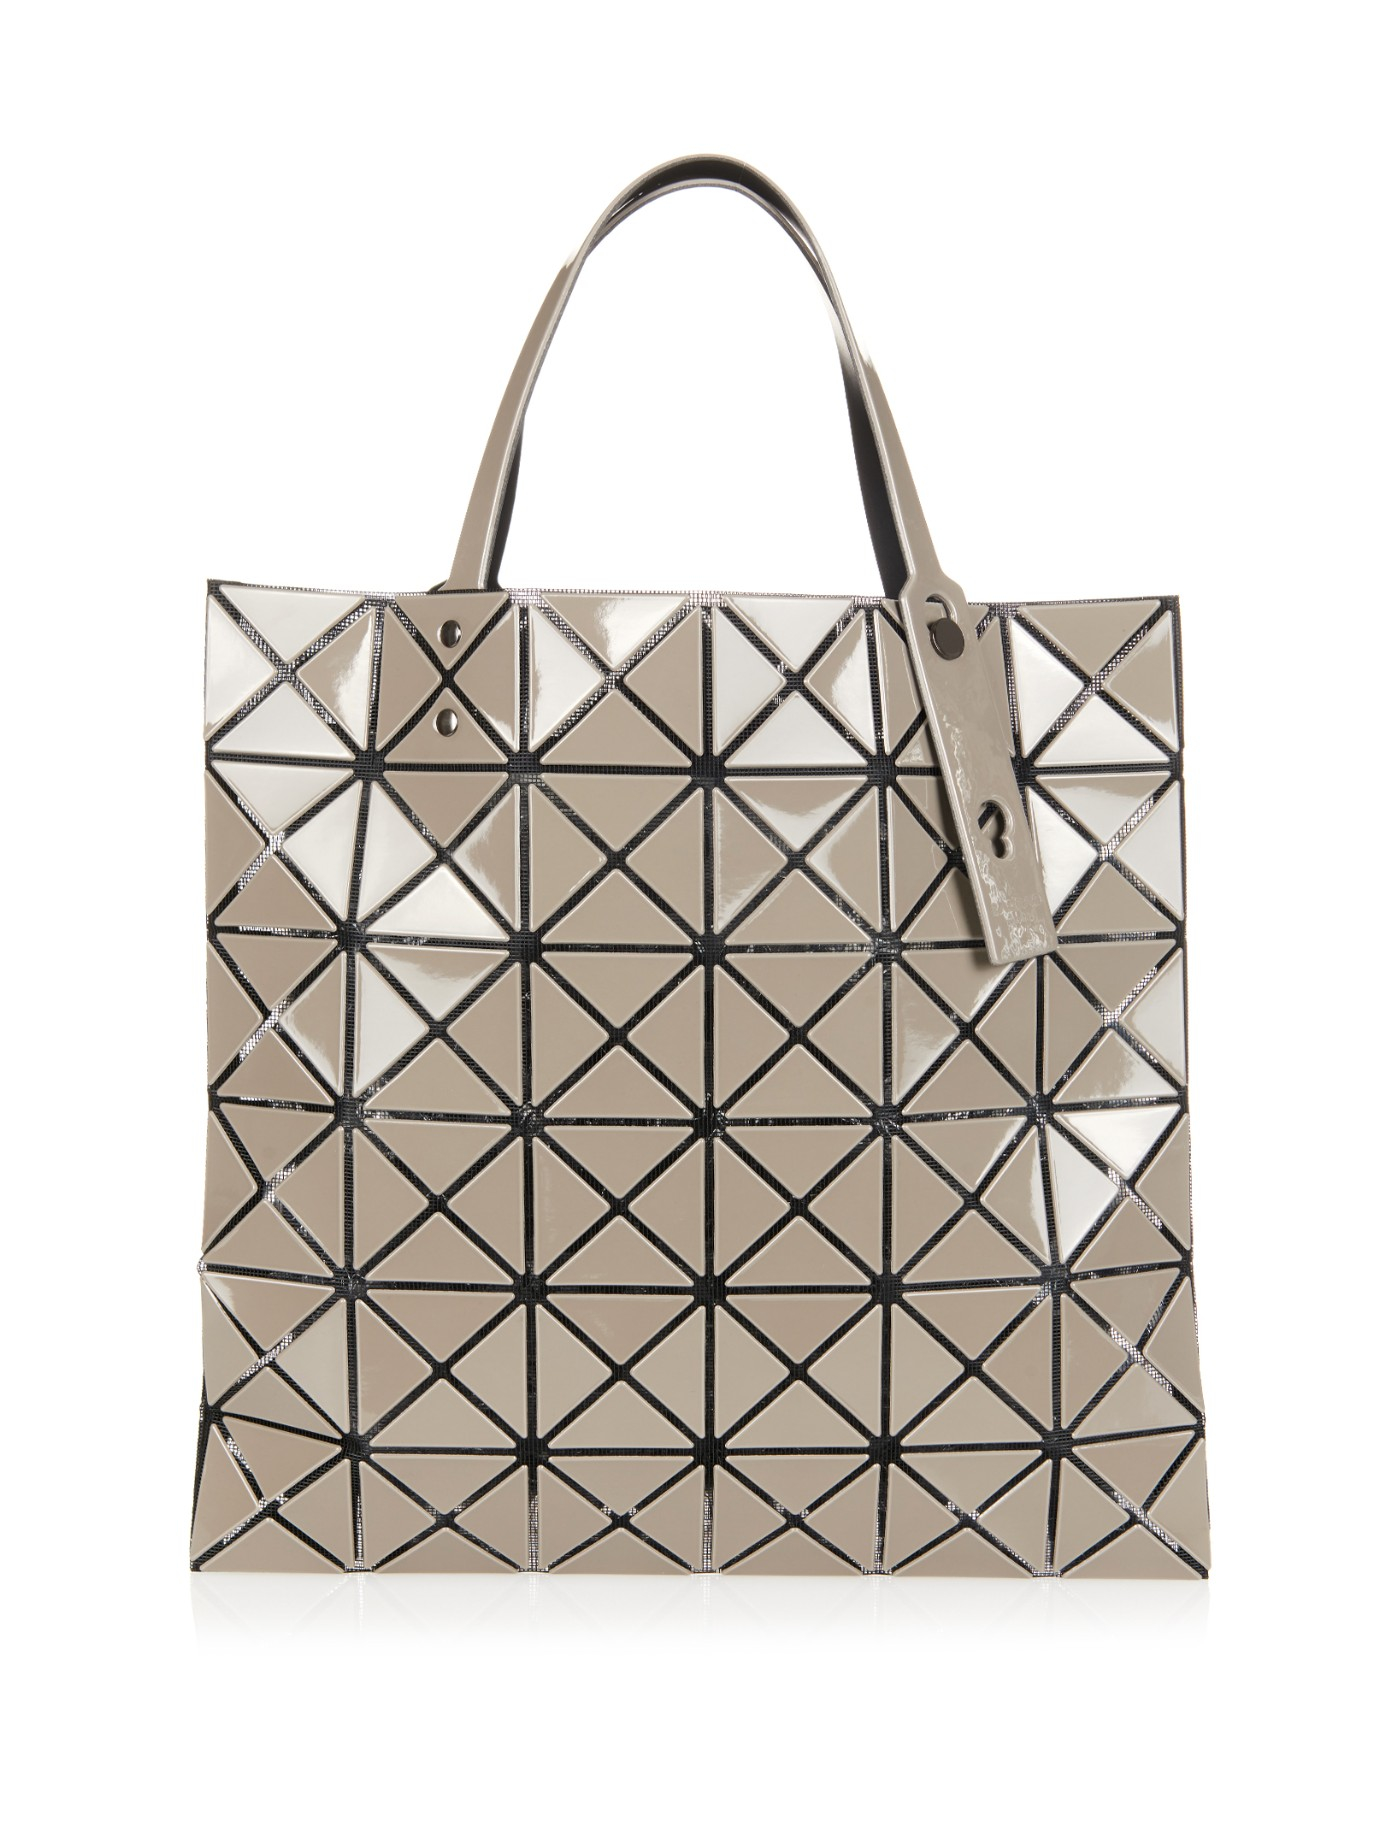 Lyst - Bao bao issey miyake Lucent Basic Tote in Gray